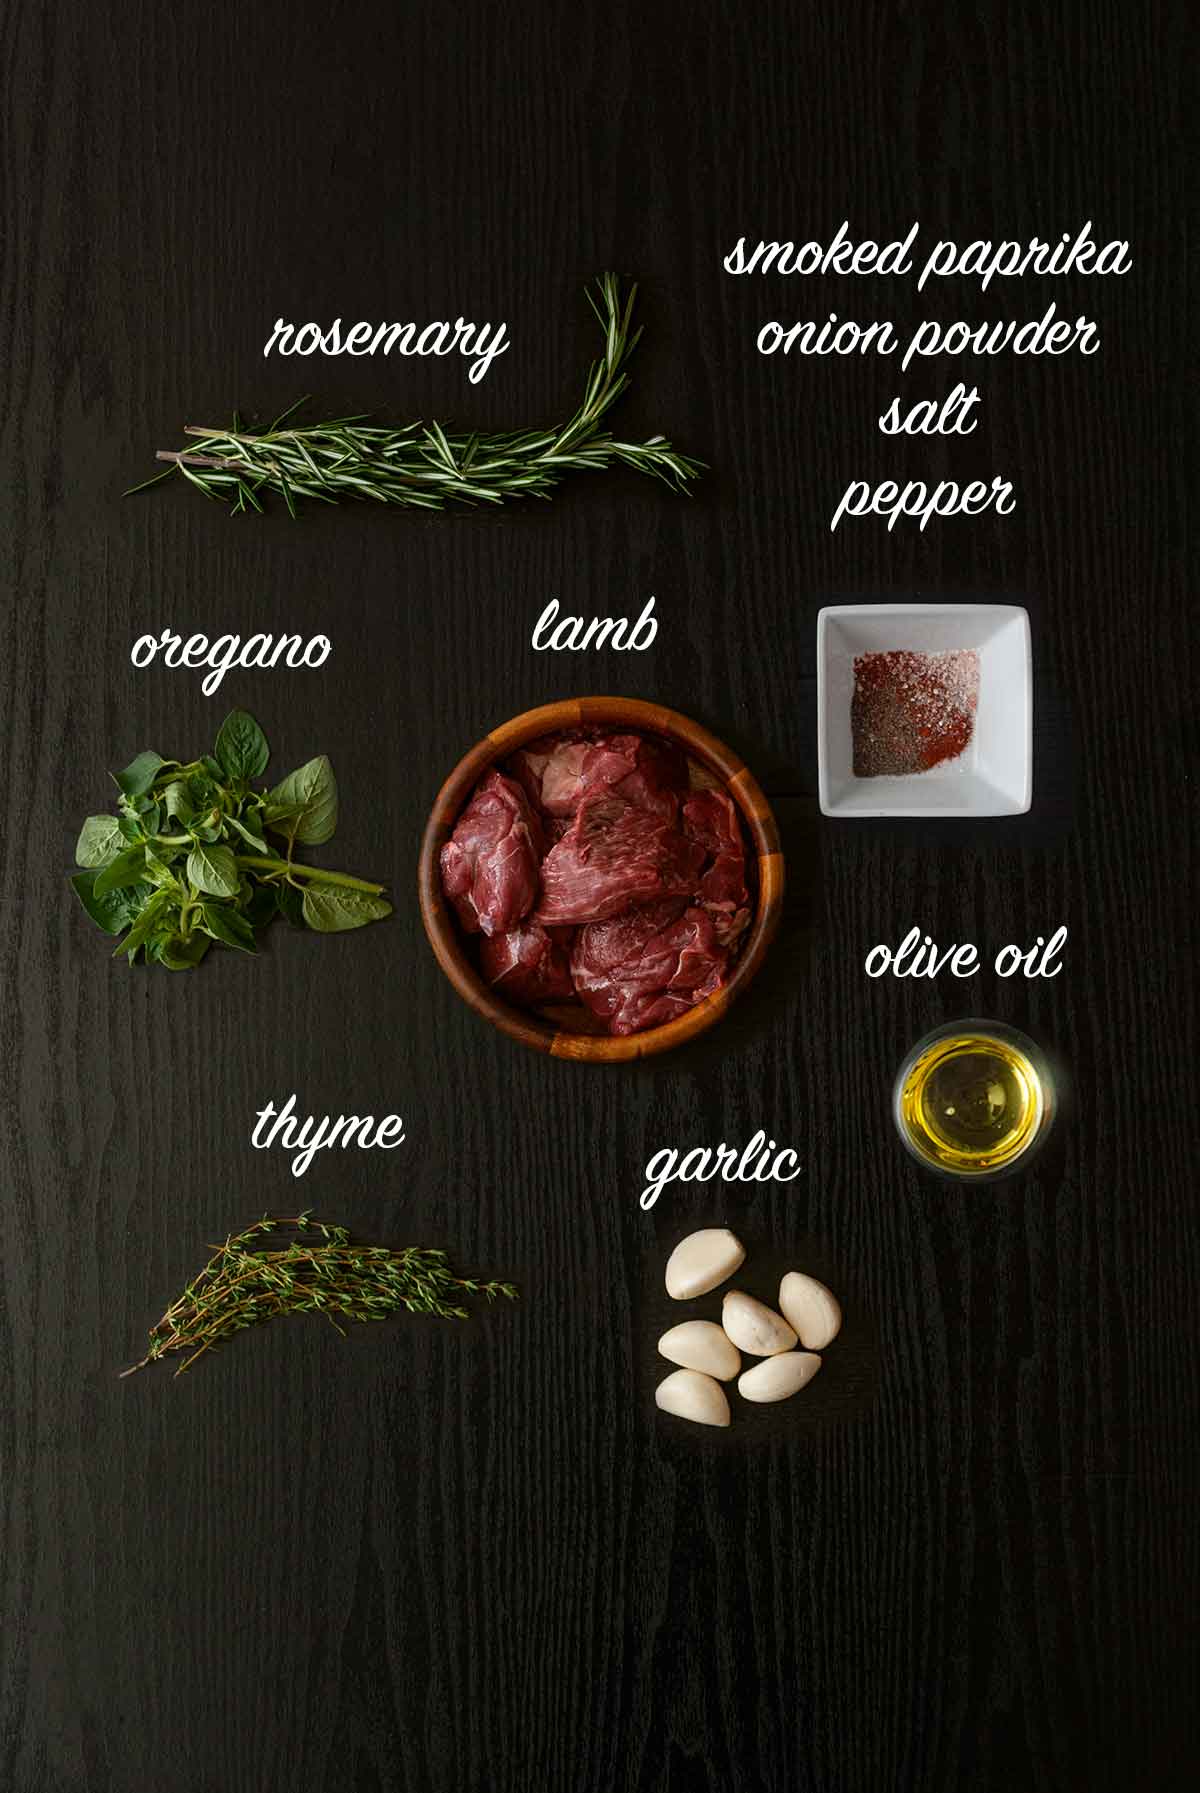 7 ingredients on a table with labels describing what they are.